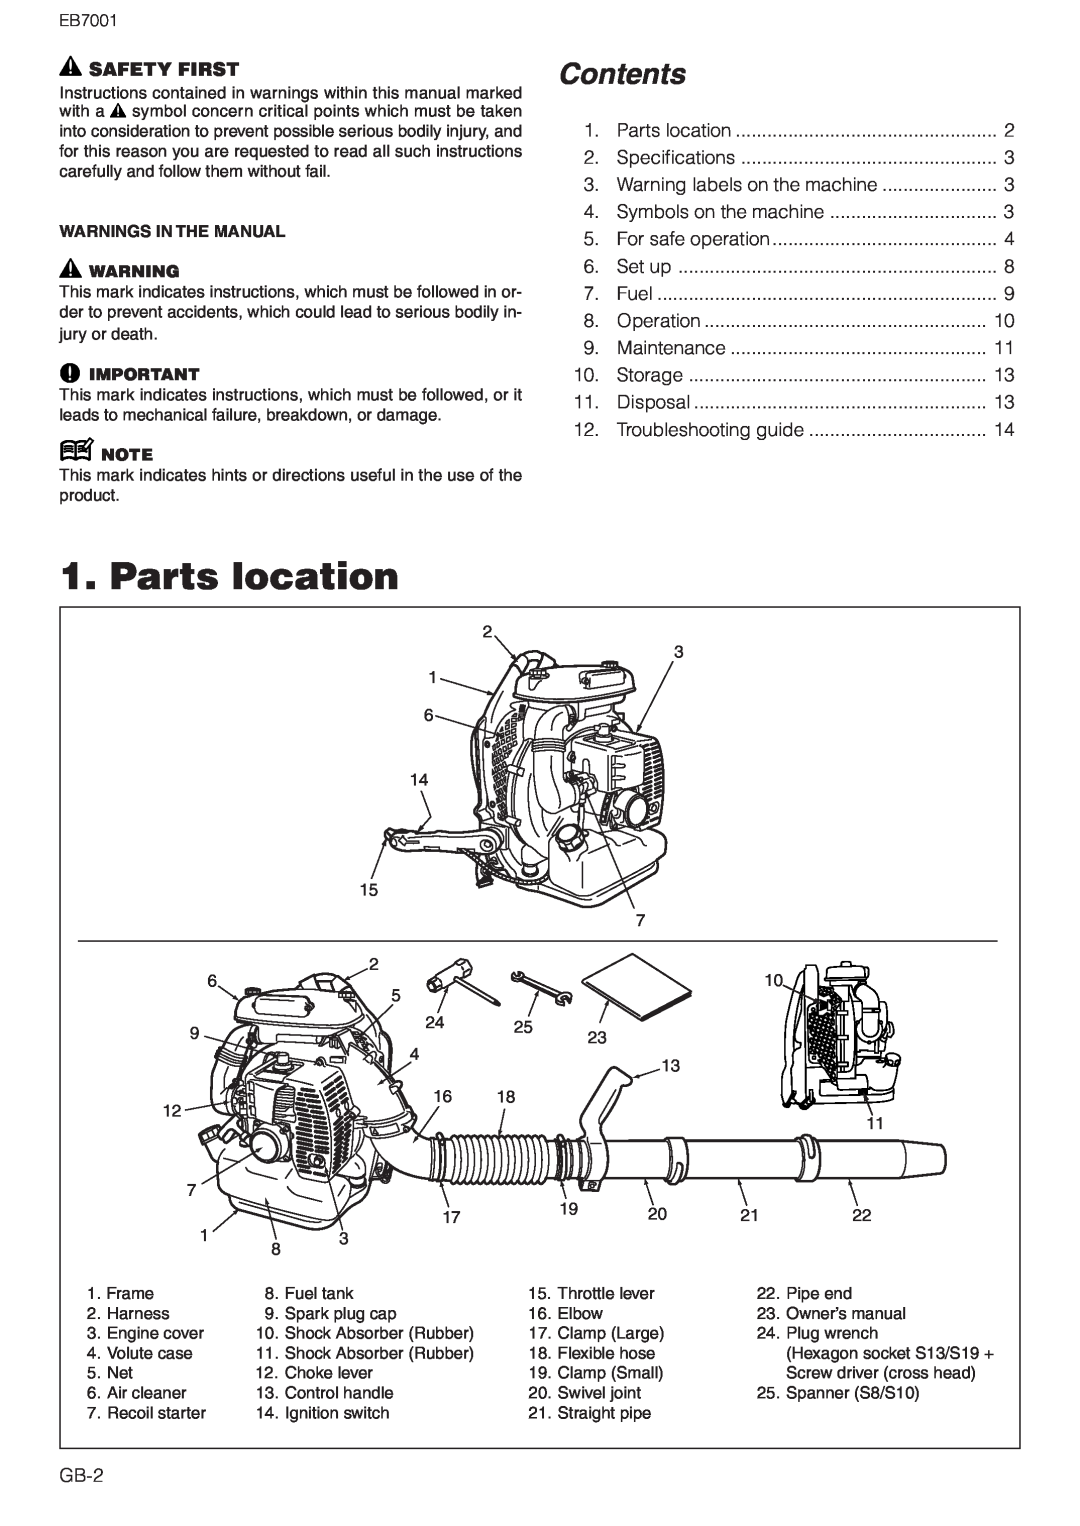 Zenoah EB7001 owner manual Parts location, Safety First, Contents 